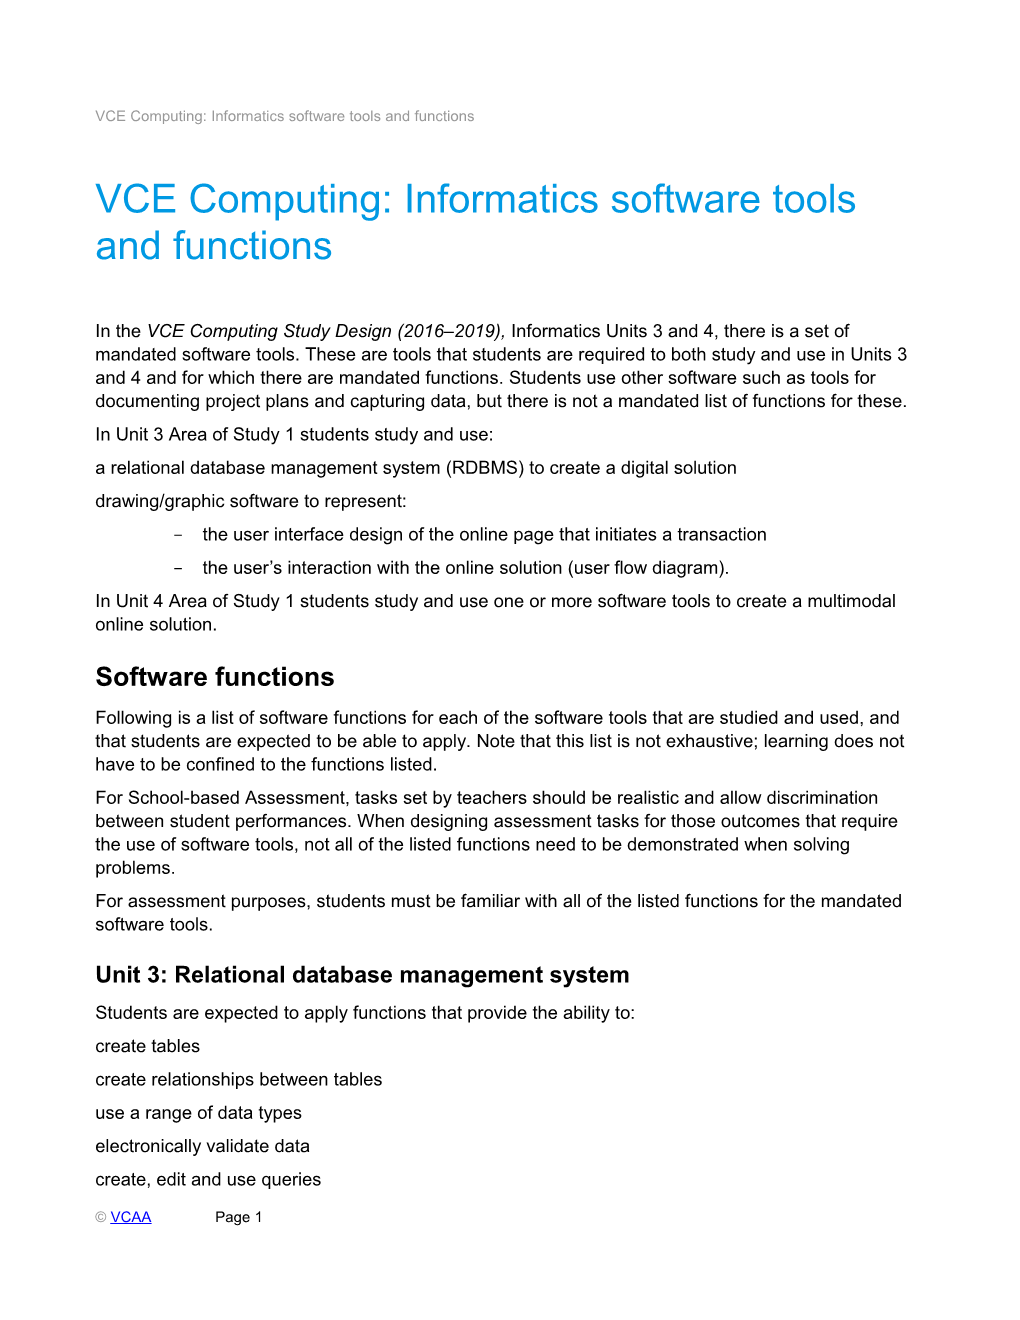 VCE Computing: Informatics Software Tools and Functions